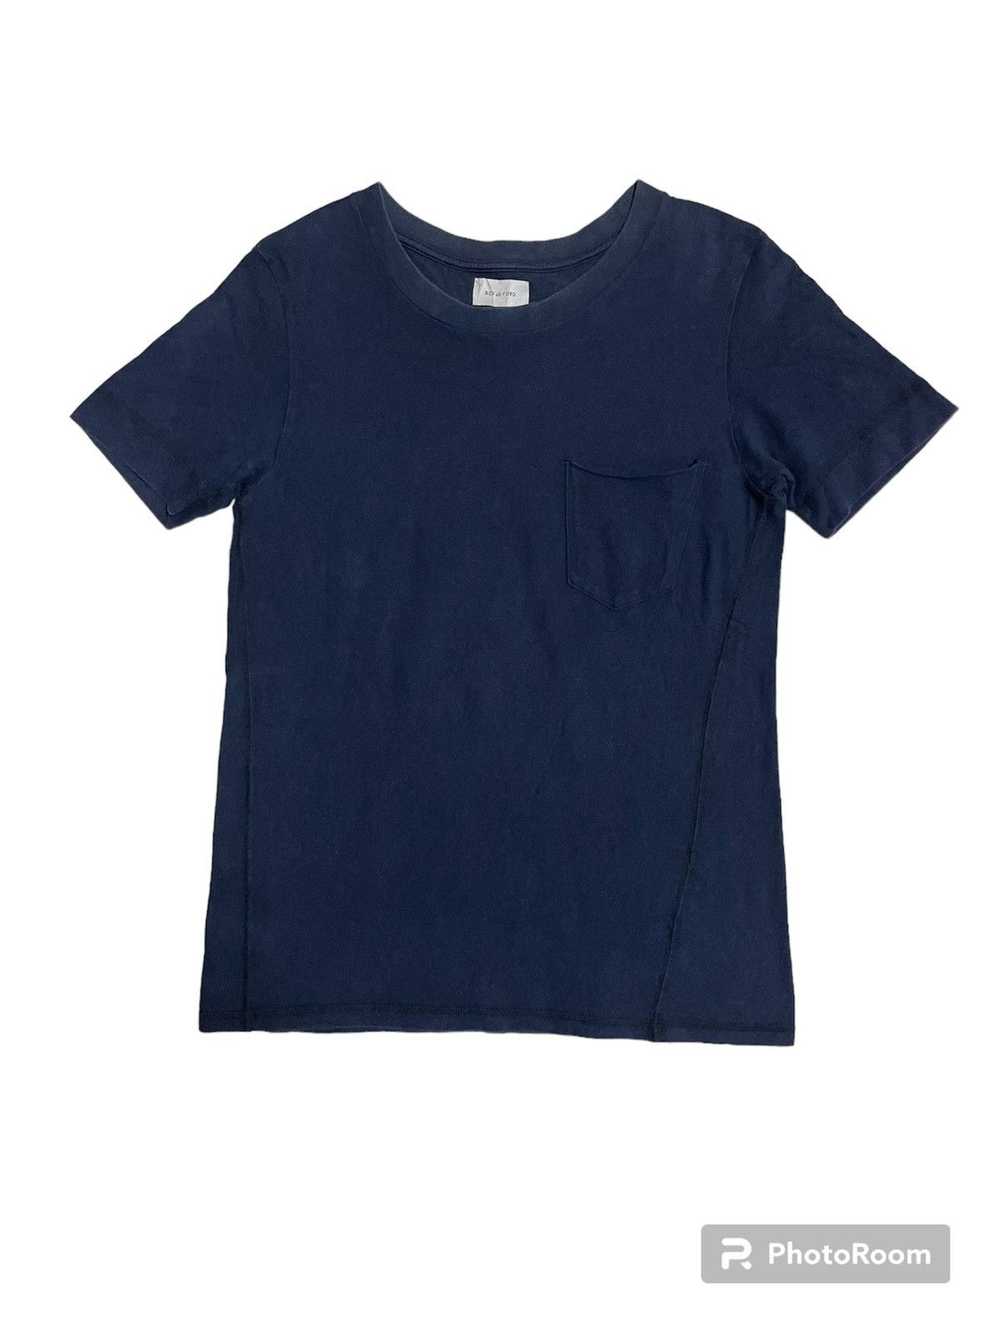 Bed J W Ford Bed JW Ford T Shirt Pocket Faded - image 1